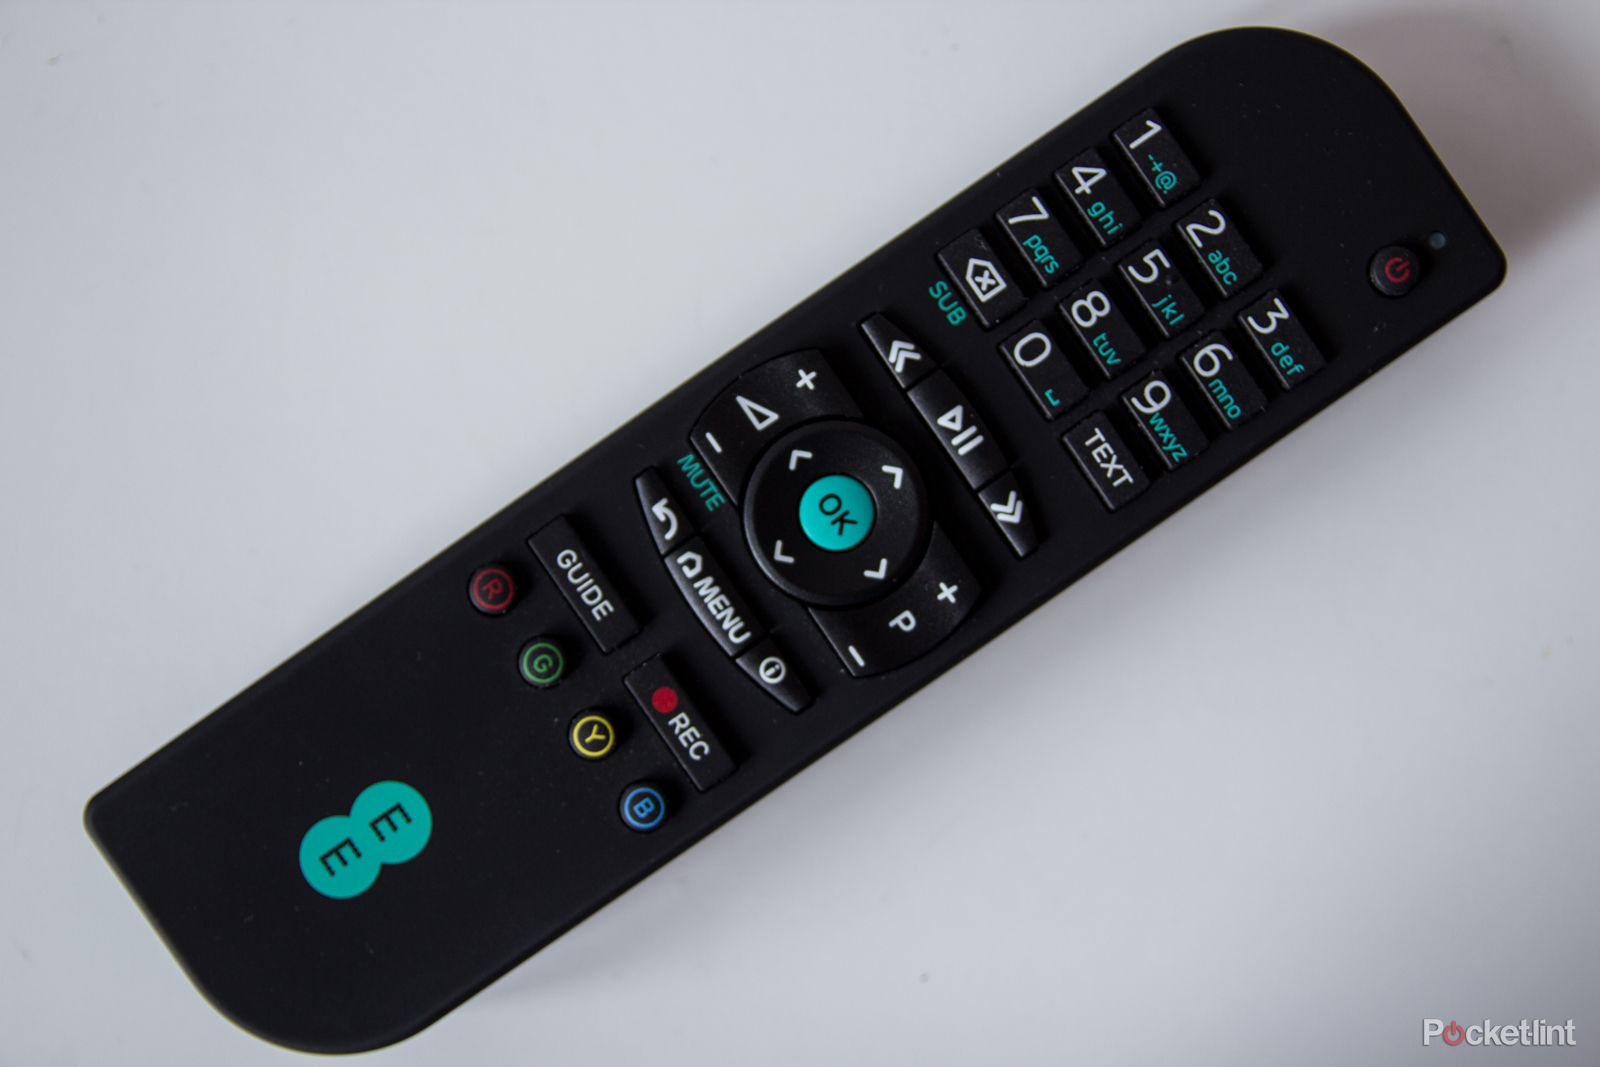 ee tv review image 18